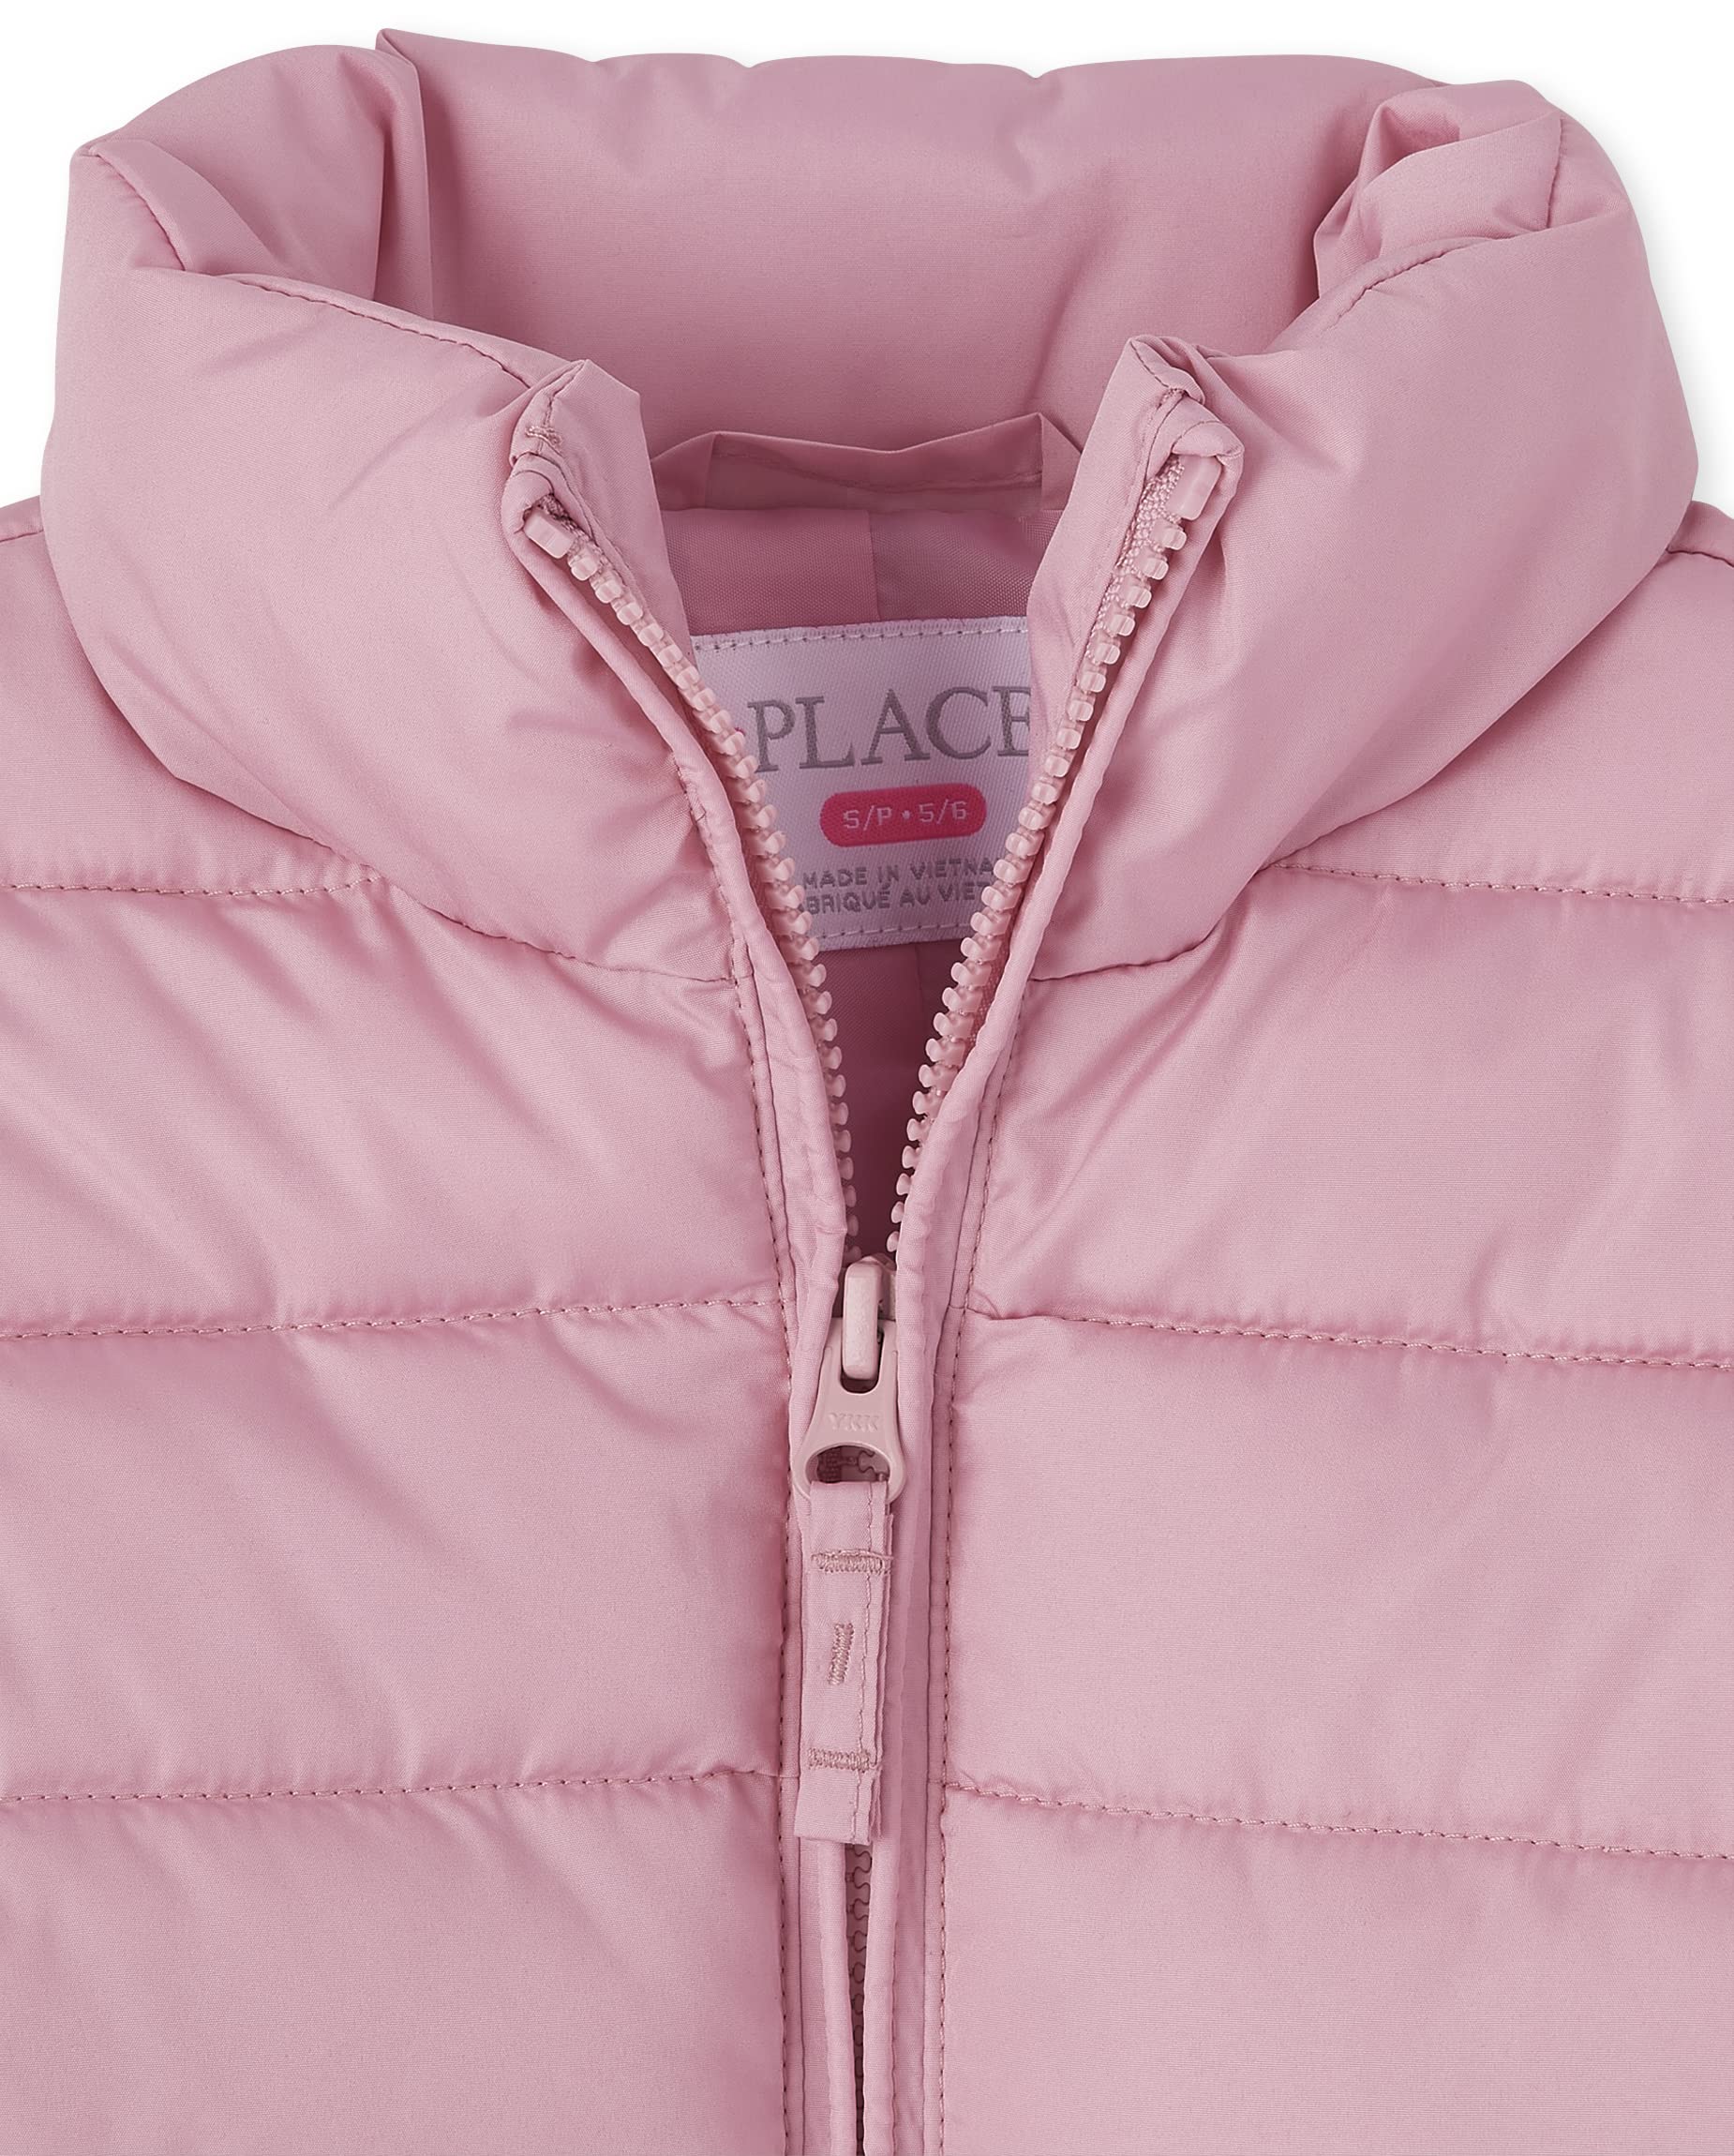 The Children's Place Girls Medium Weight Puffer Jacket, Wind-resistant, Water-resistant